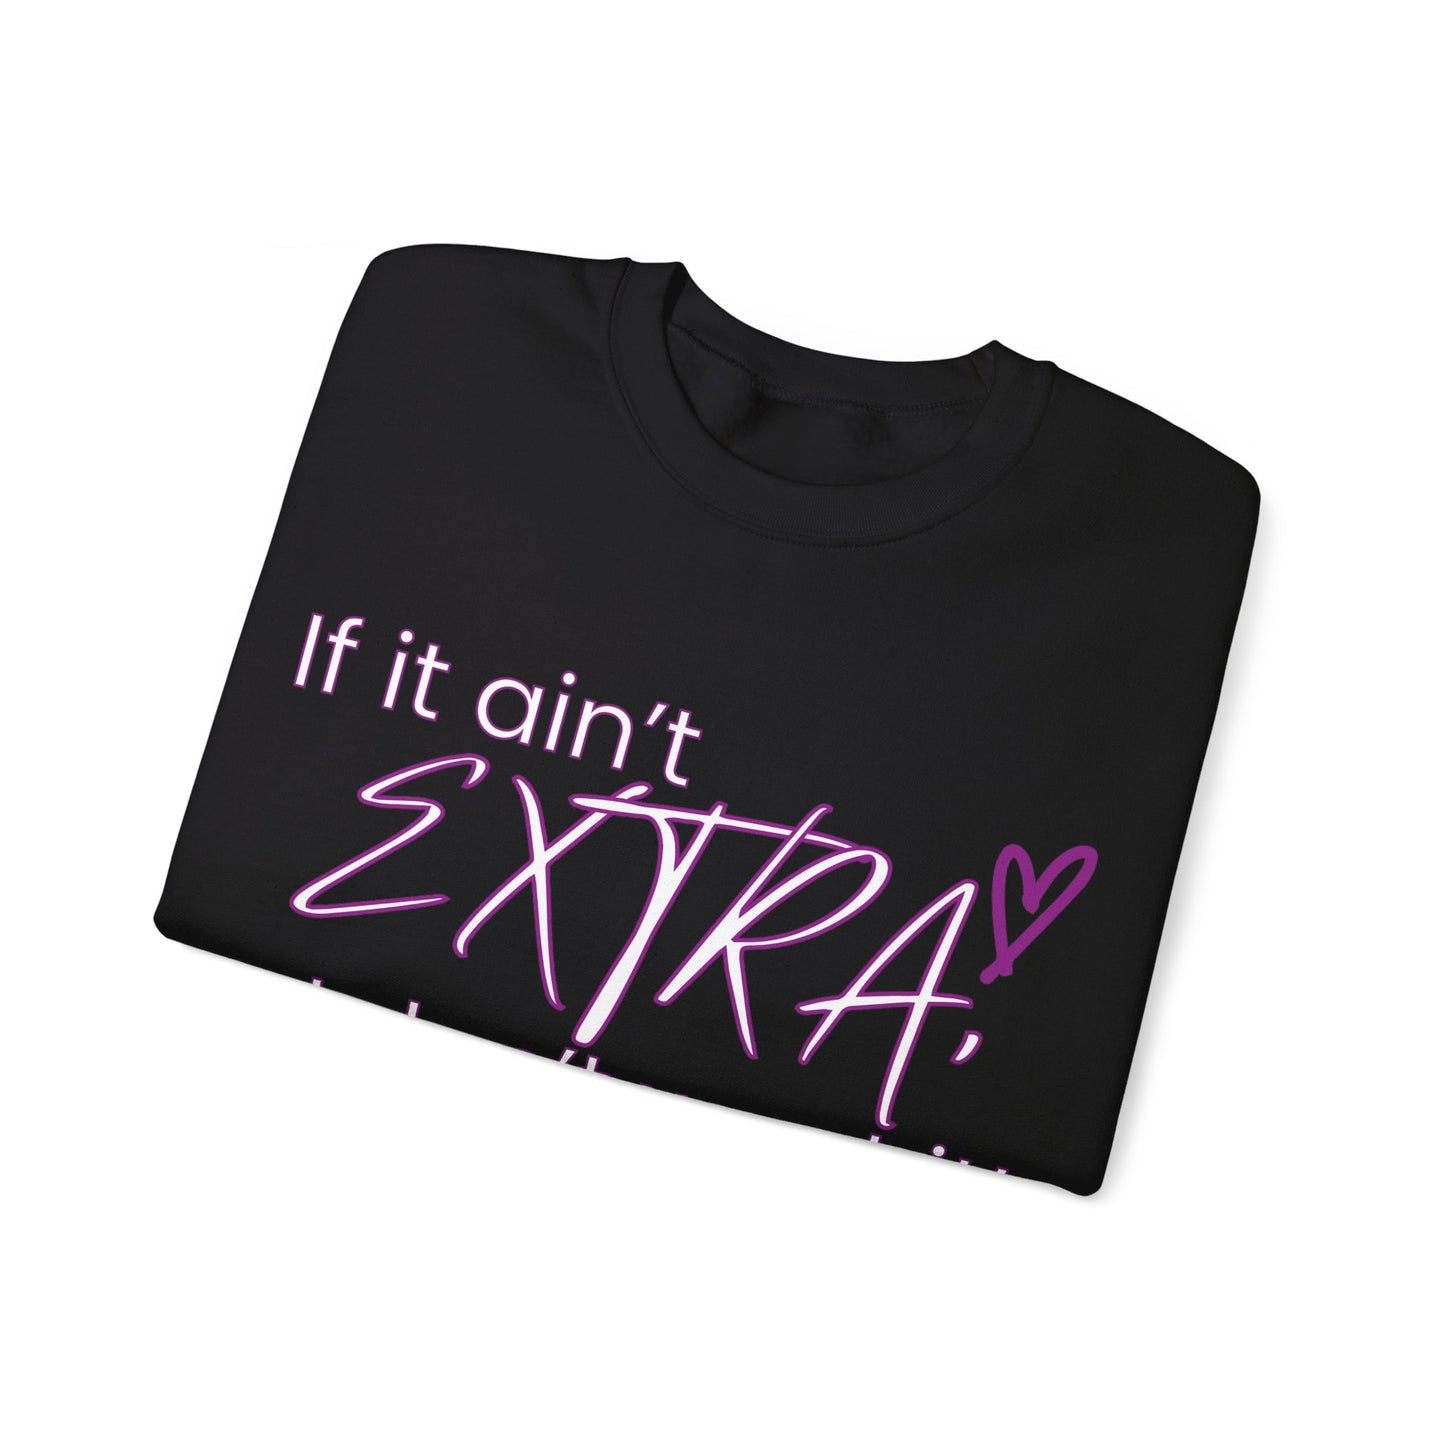 If It Ain't EXTRA I Don't Want It Sweatshirt - Stylish and Comfortable | Shop Now!